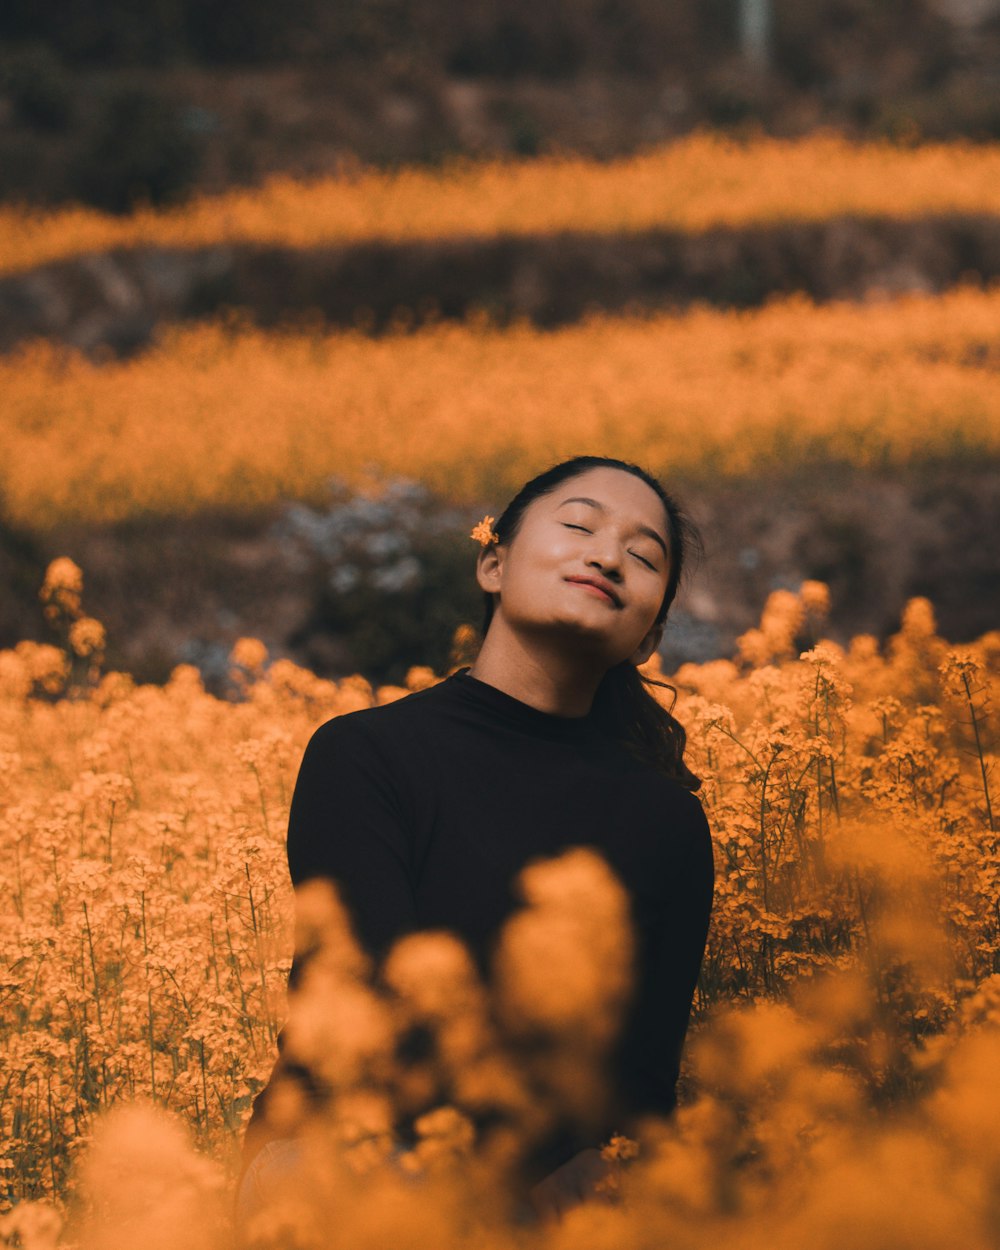 woman in black turtleneck shirt standing on yellow flower field during daytime